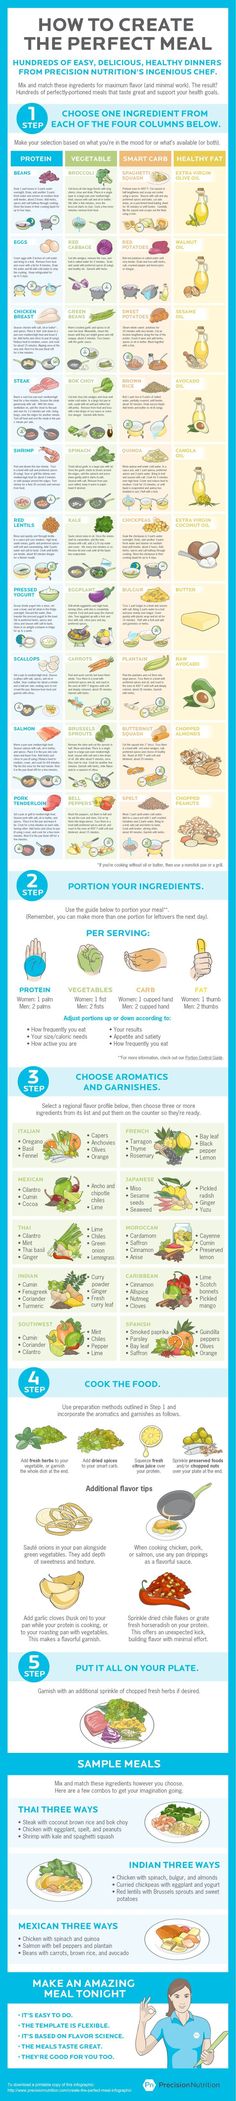 Create the perfect meal with this simple 5-step guide: <a href="http://www.precisionnutrition.com/create-the-perfect-meal-infographic" rel="nofollow" target="_blank">www.precisionnutr...</a>